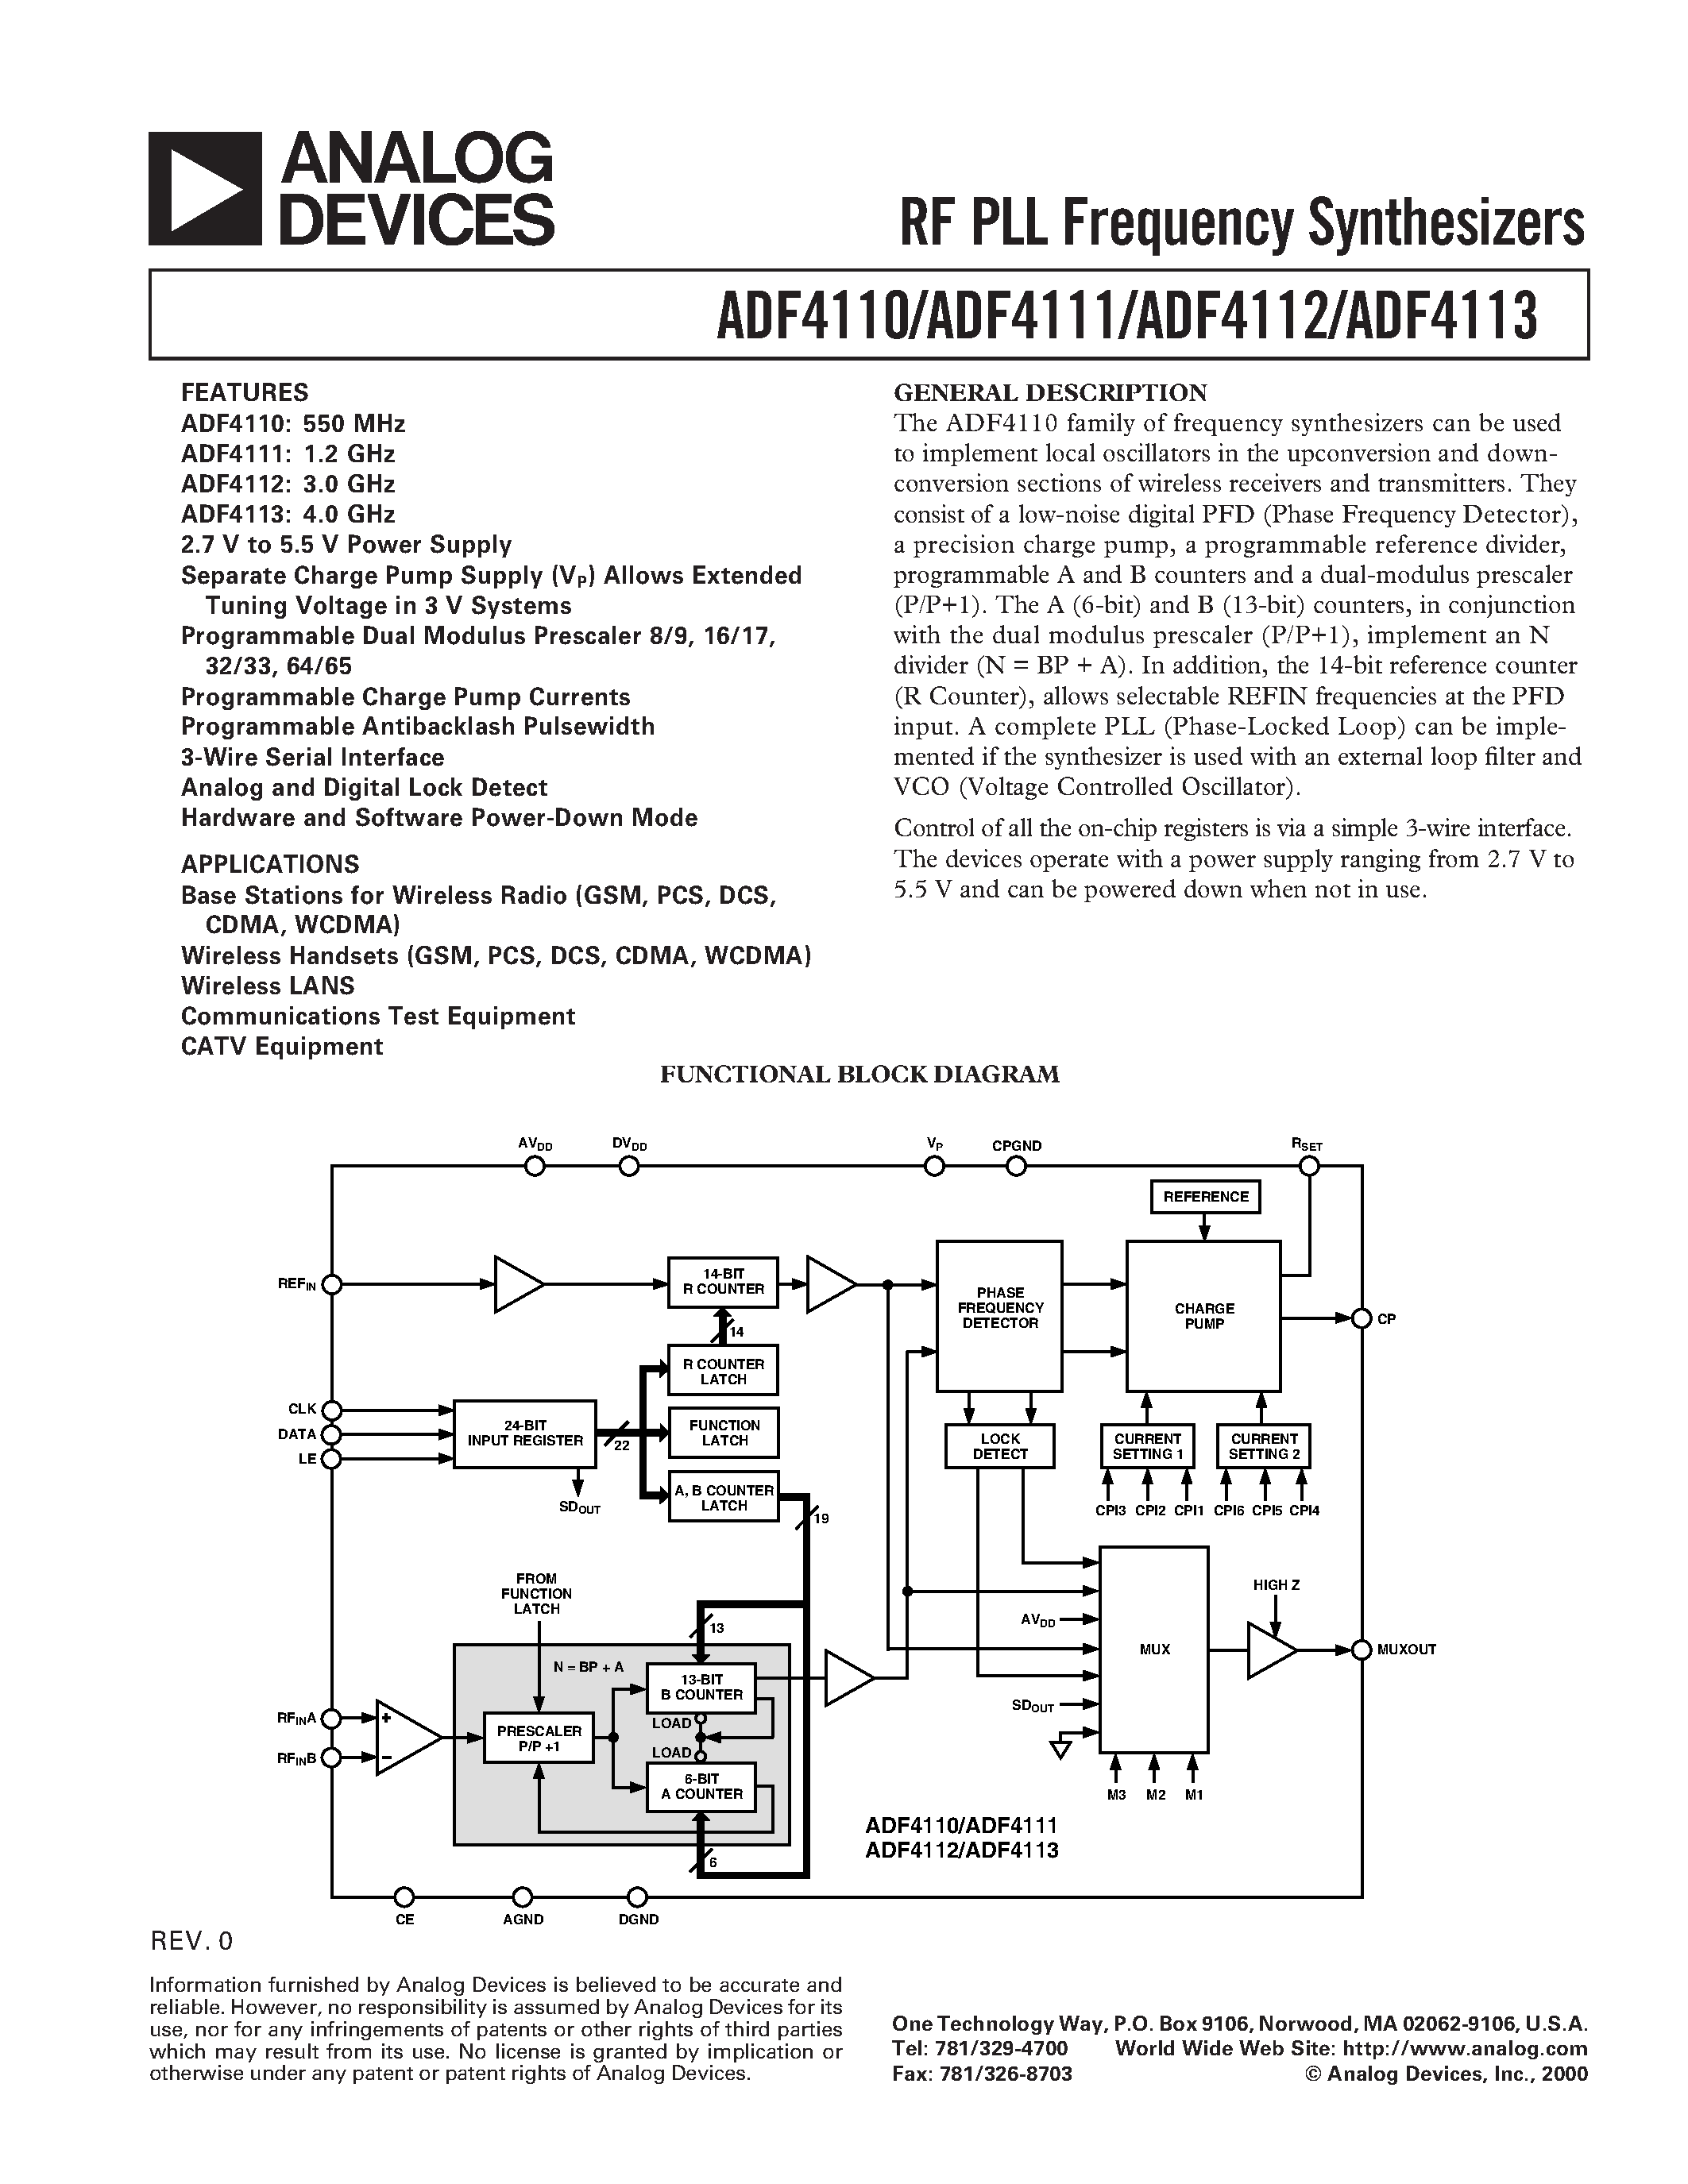 Даташит ADF4111 - RF PLL Frequency Synthesizers страница 1